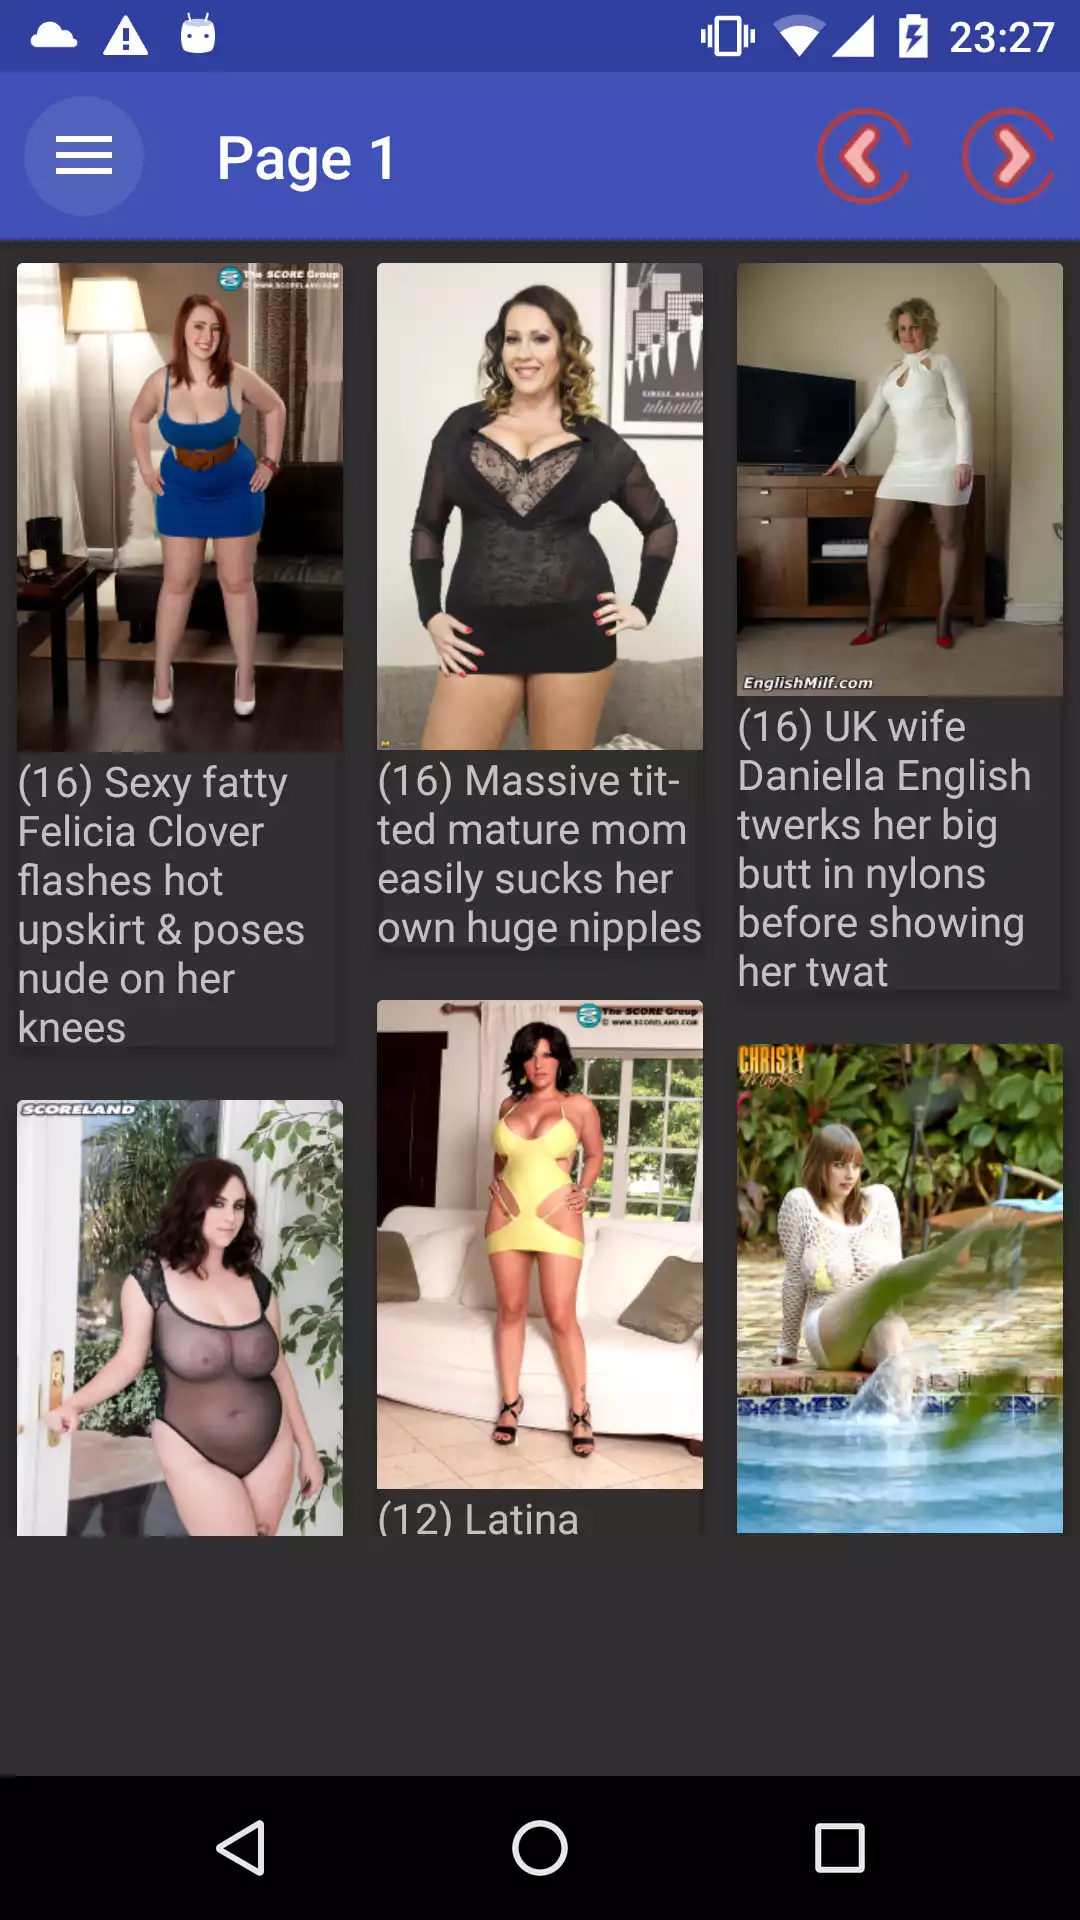 BBW2 Galleries comics,cfnm,pegging,galleries,best,pictures,ebony,pornstar,photos,wallpapers,apk,app,free,new,adult,hentai,sexy,hentei,porn,caprice,browser,pics,apps